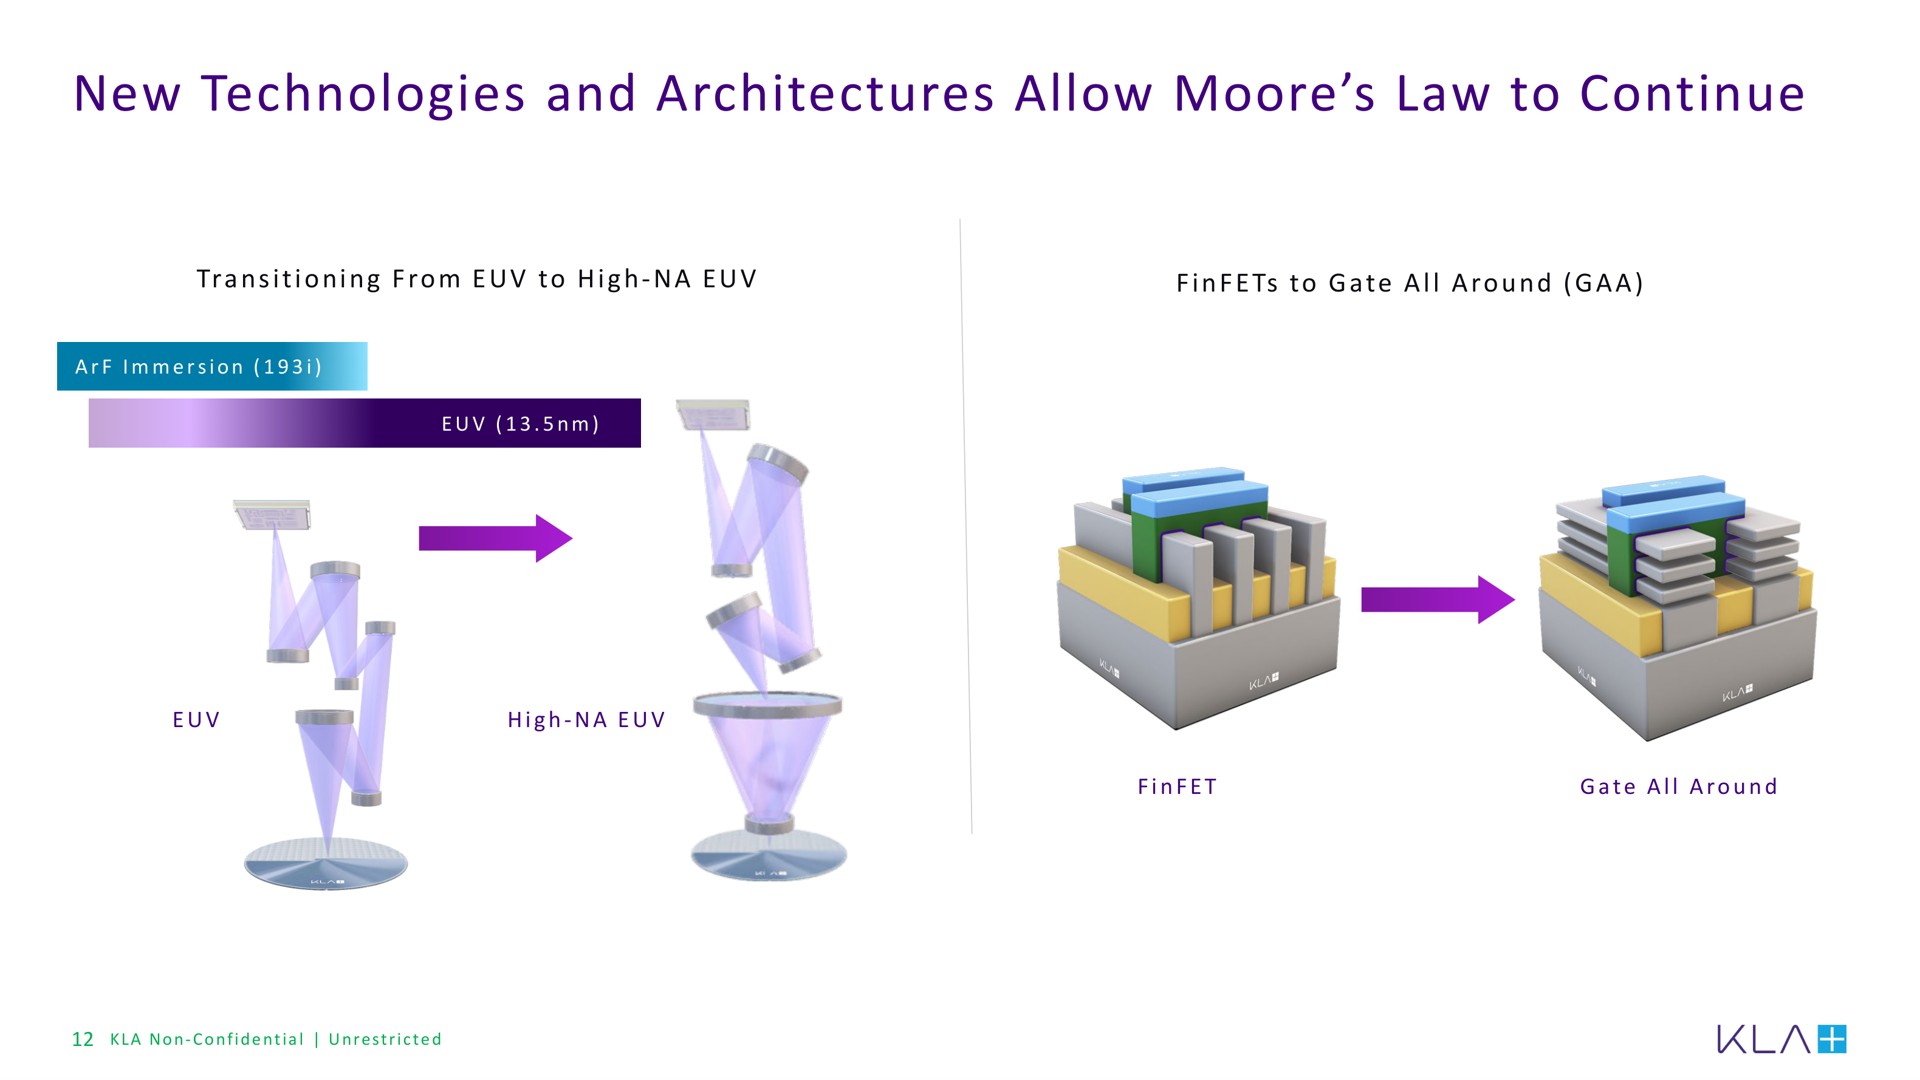 new technologies and architectures allow law to continue | KLA